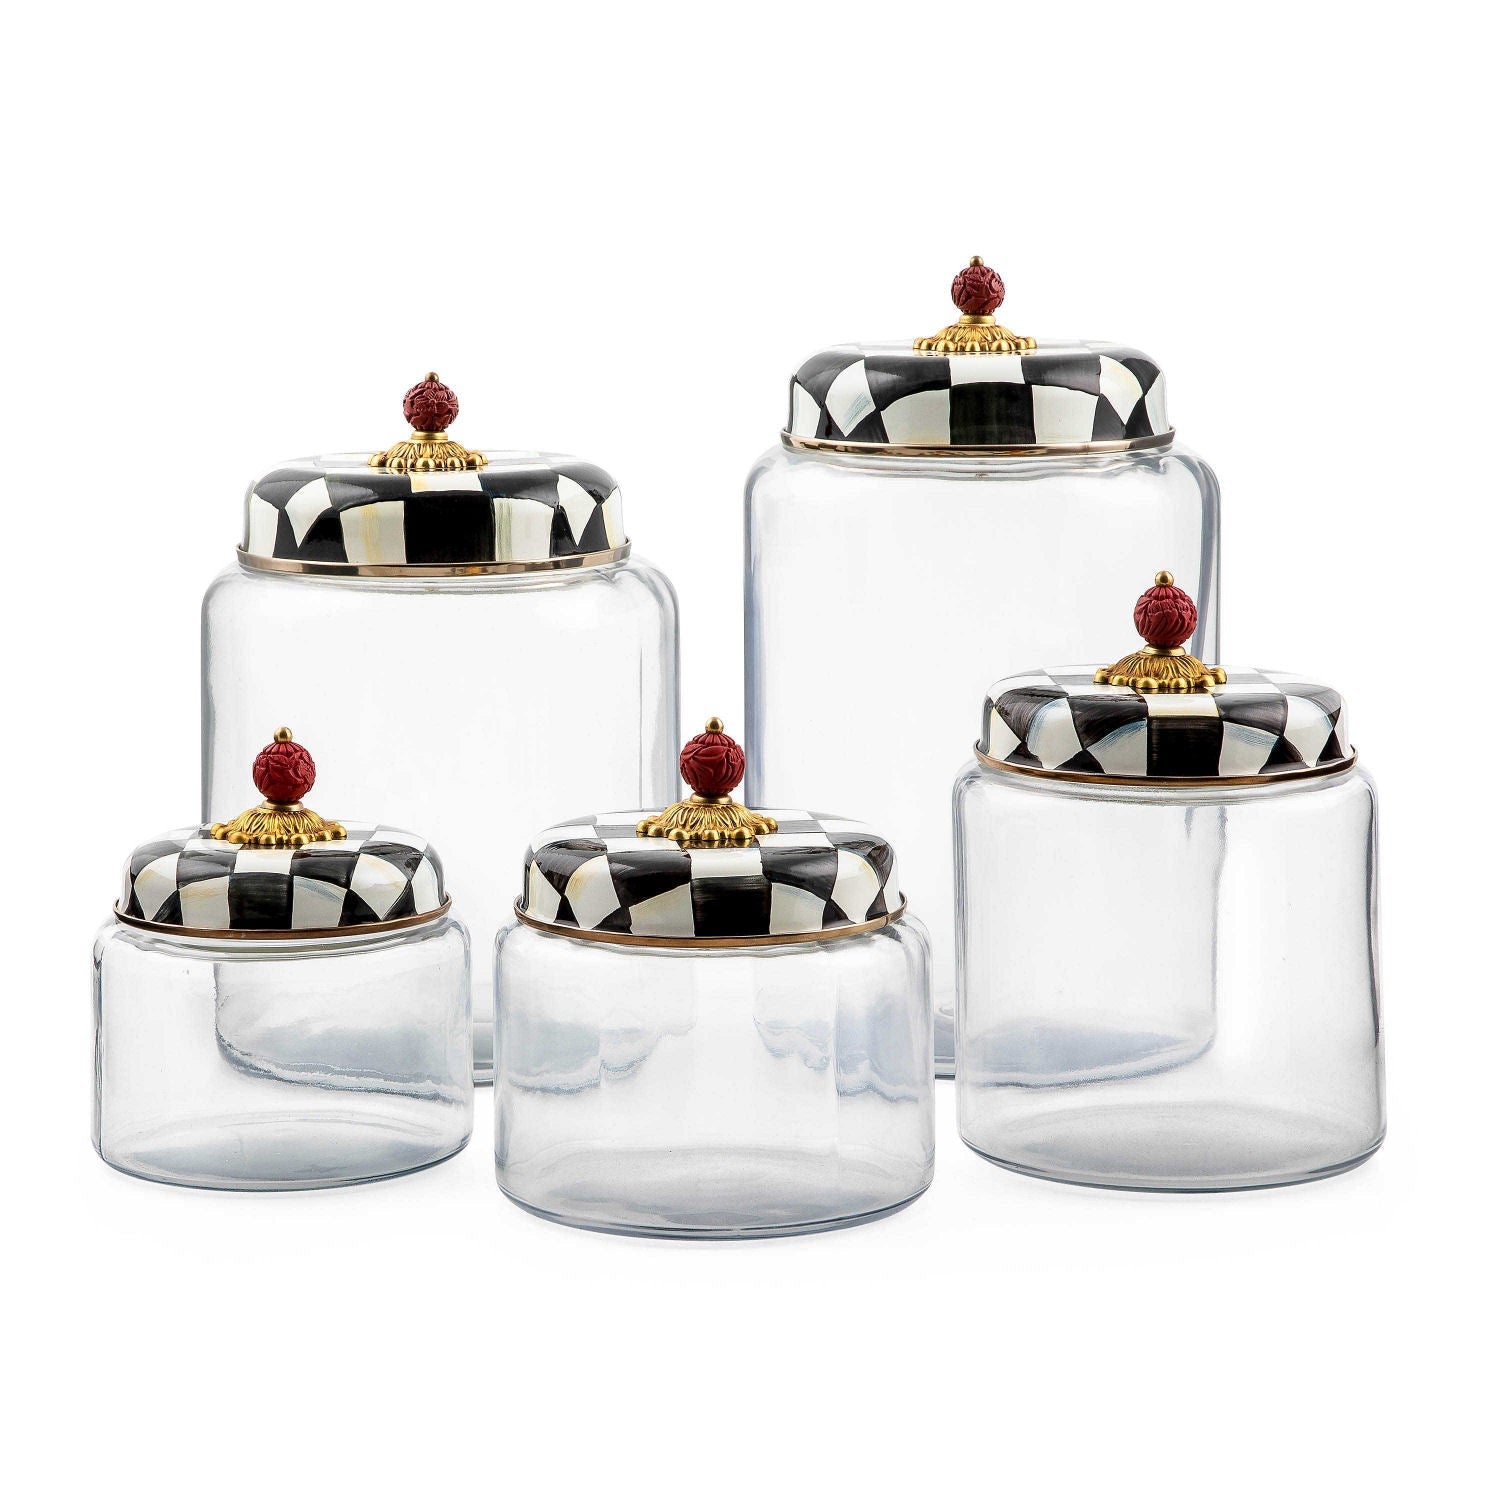 Mackenzie - Childs Courtly Check Storage Canister - Big - |VESIMI Design| Luxury Bathrooms and Home Decor